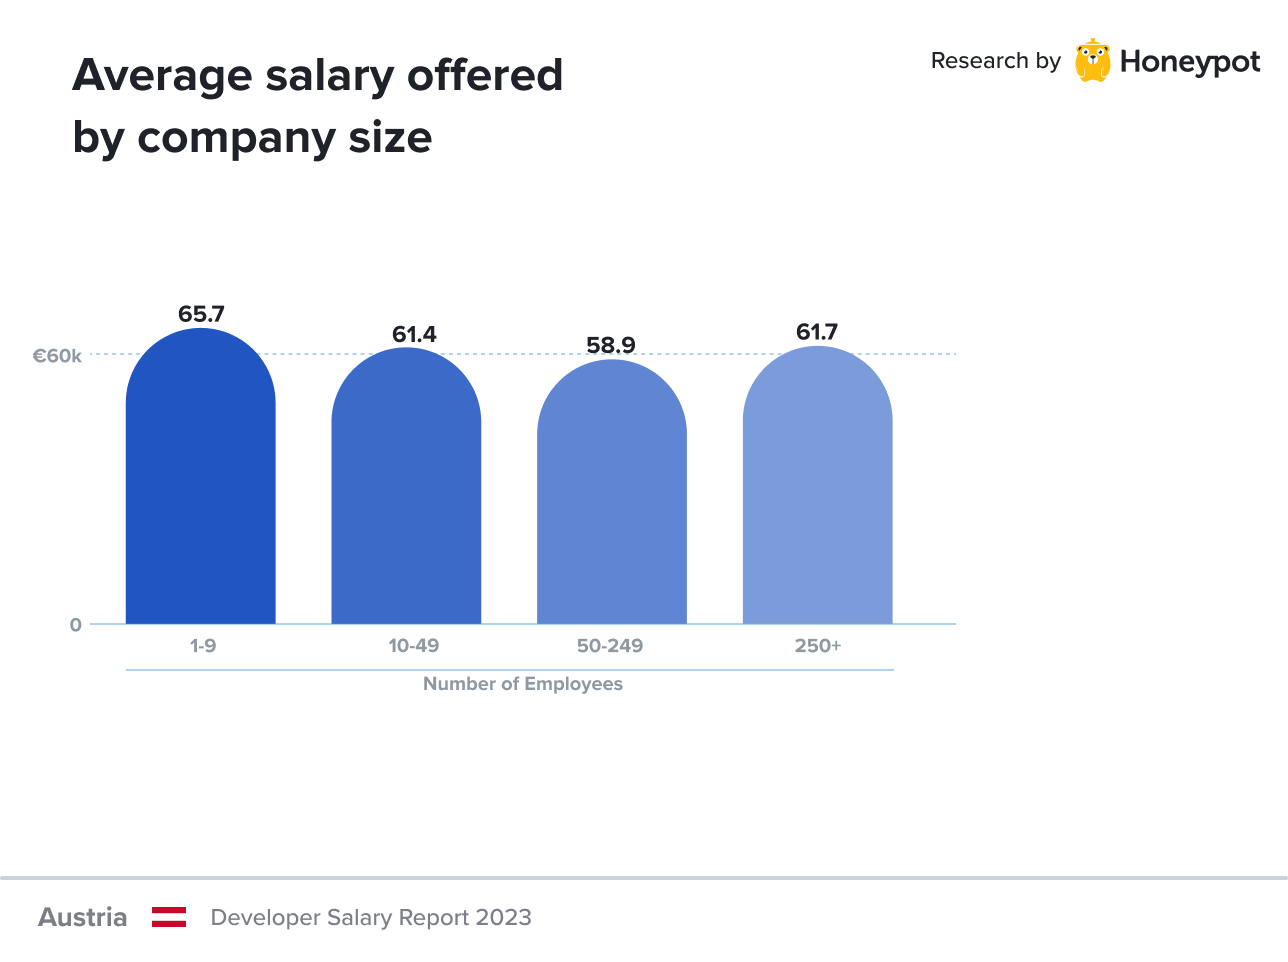 Austria – Average salary offered by company size